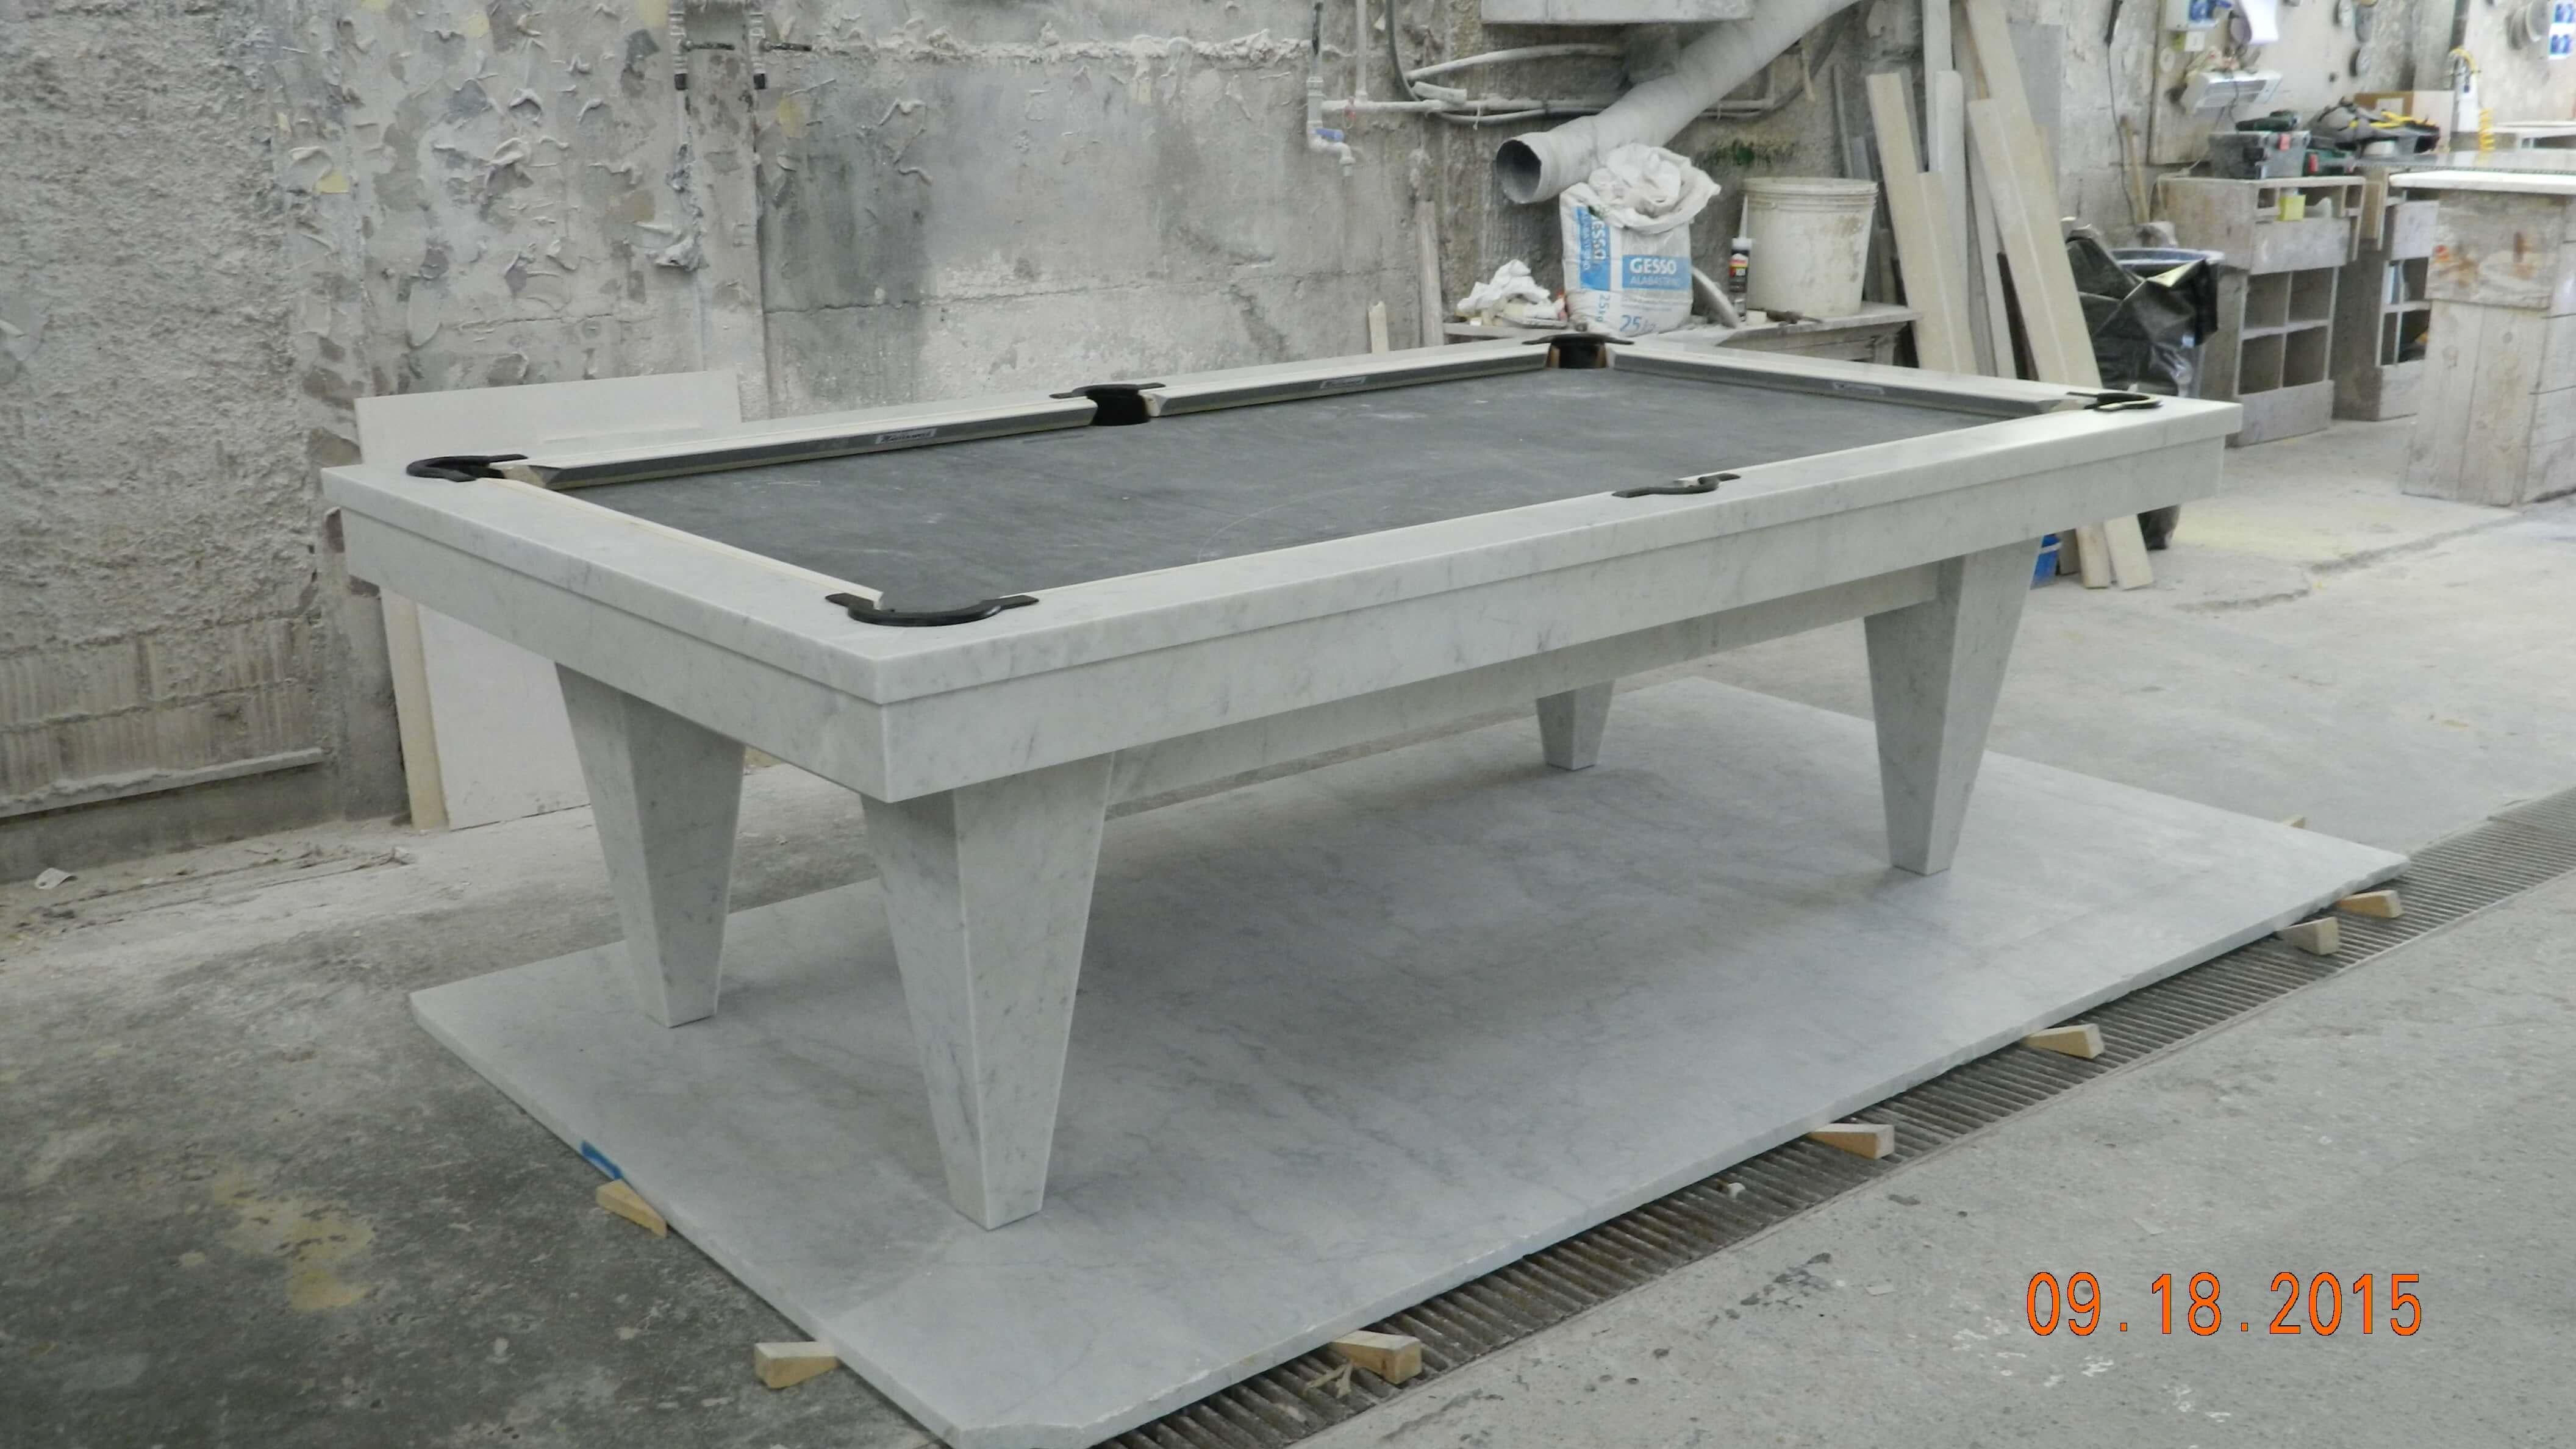 Looking for the ultimate centerpiece for game room or library from the artisans at Blatt Billiards? Consider a magnificent work of art in stone.

Sourced from the very same Tuscan stone quarry that Michelangelo used to create “David”, this